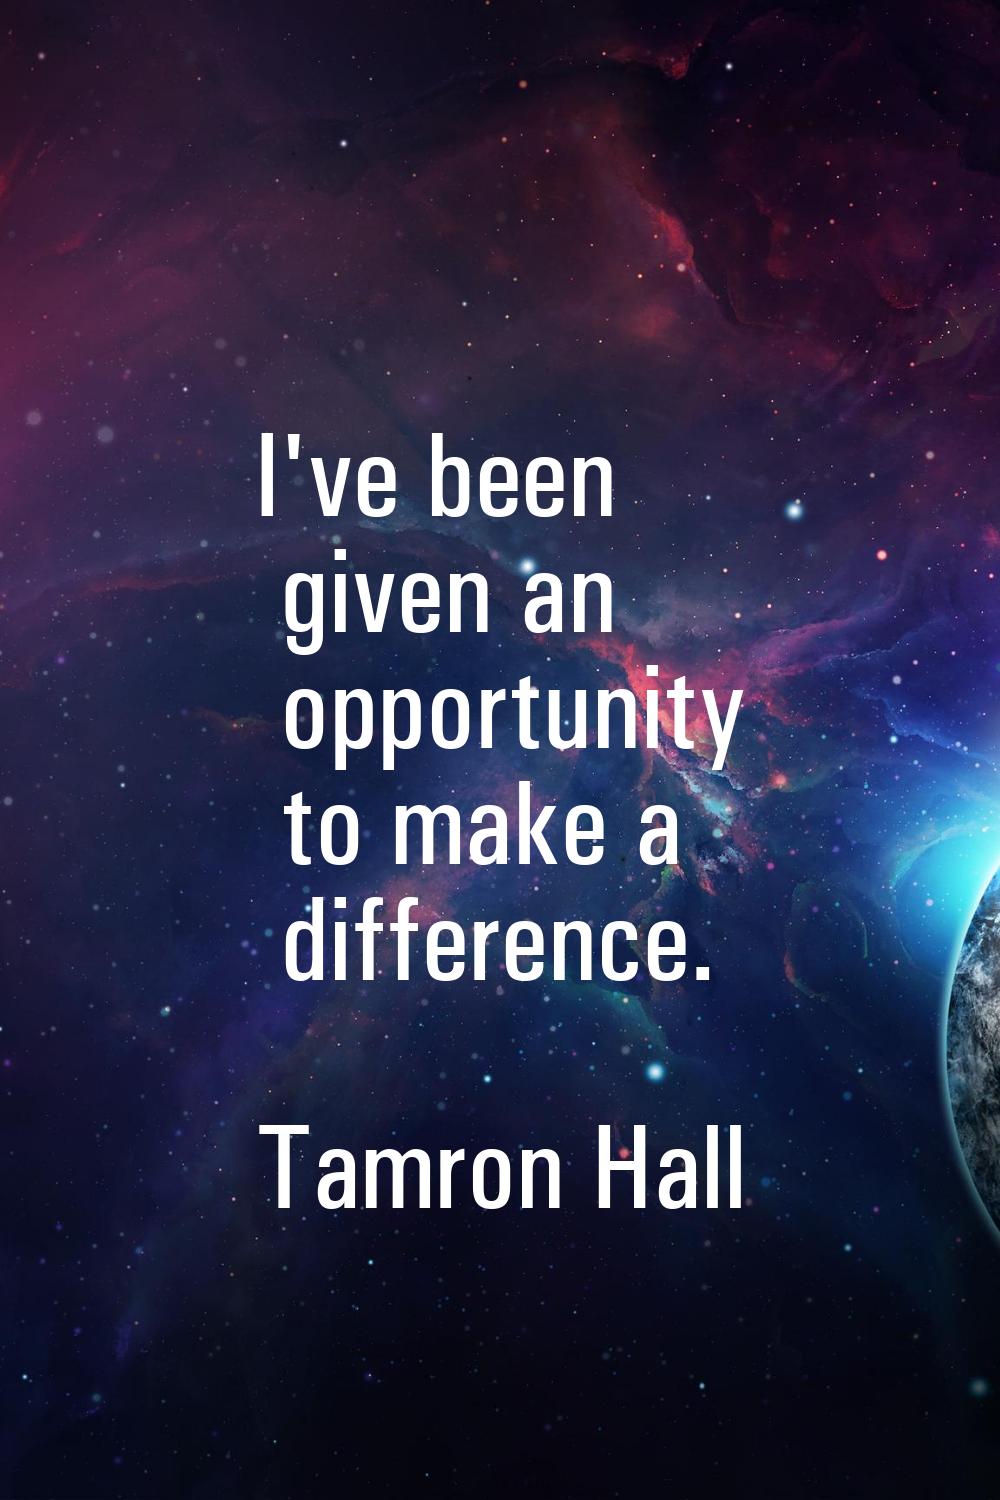 I've been given an opportunity to make a difference.